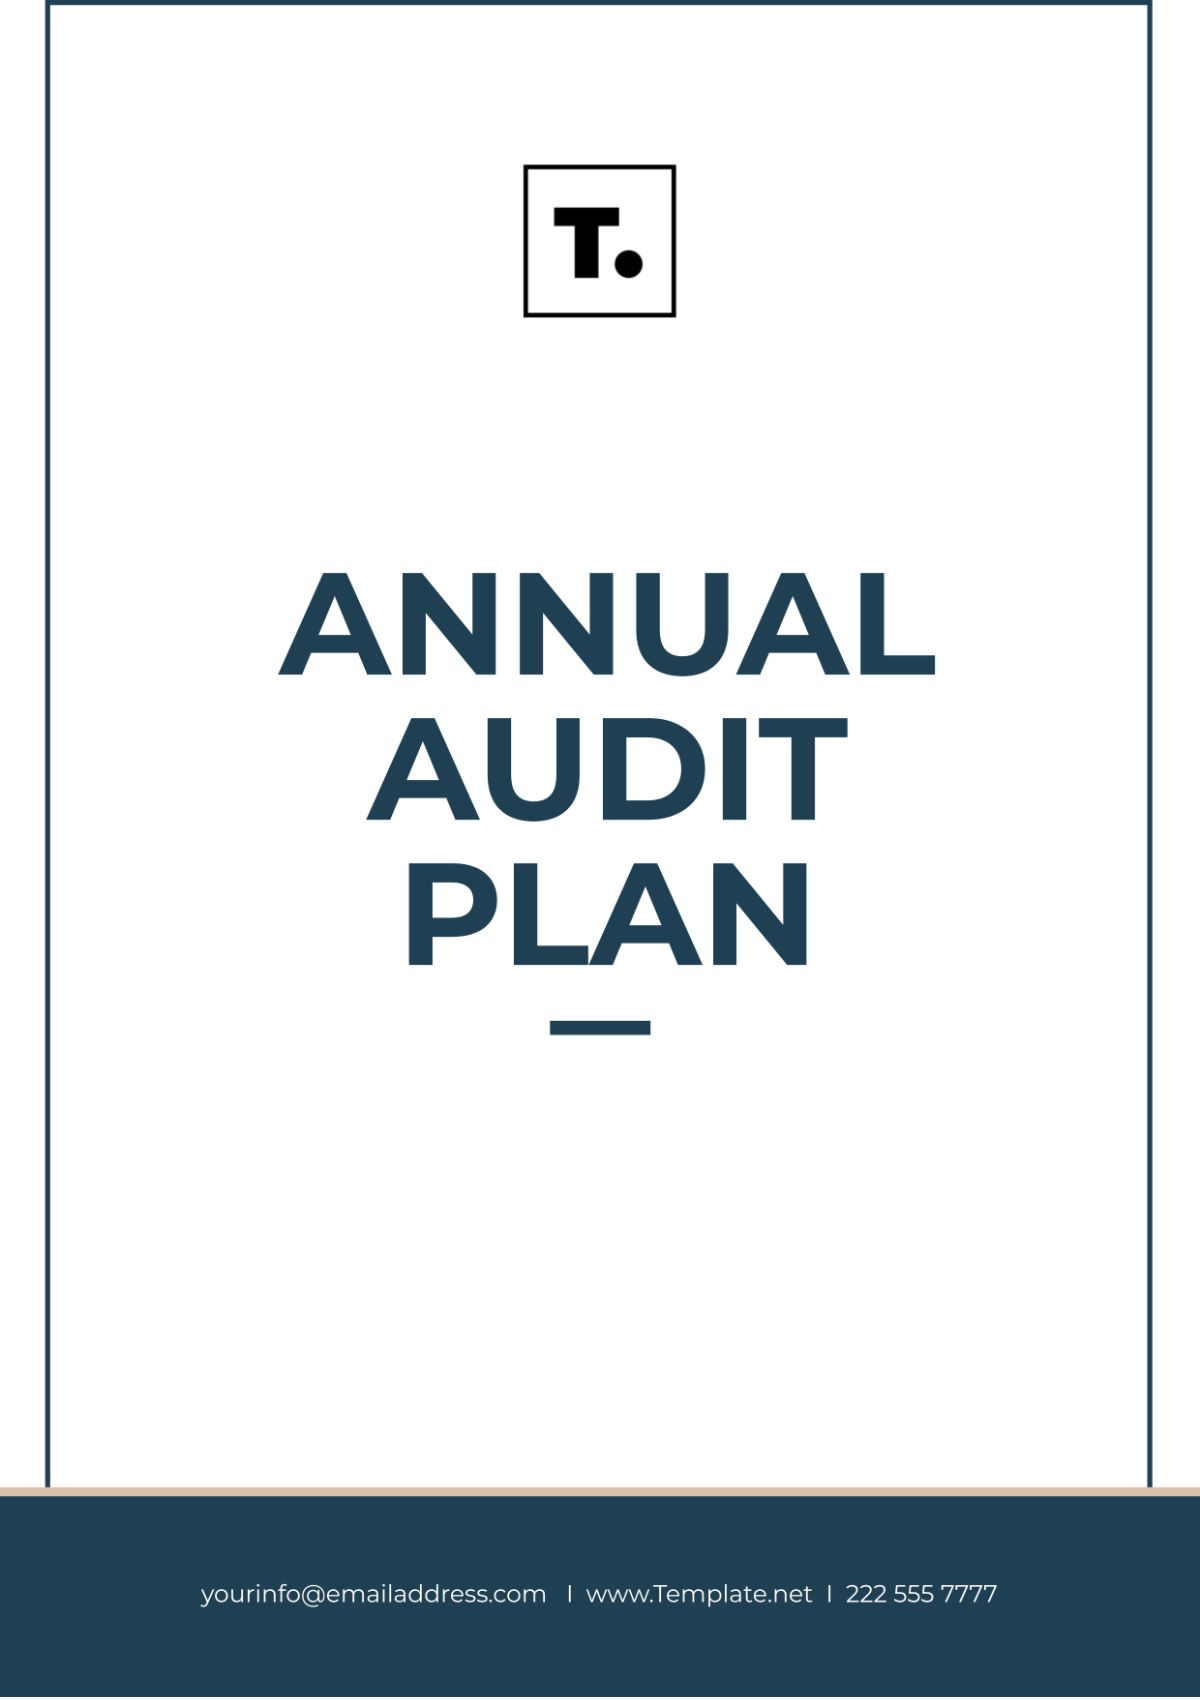 Free Annual Audit Plan Template